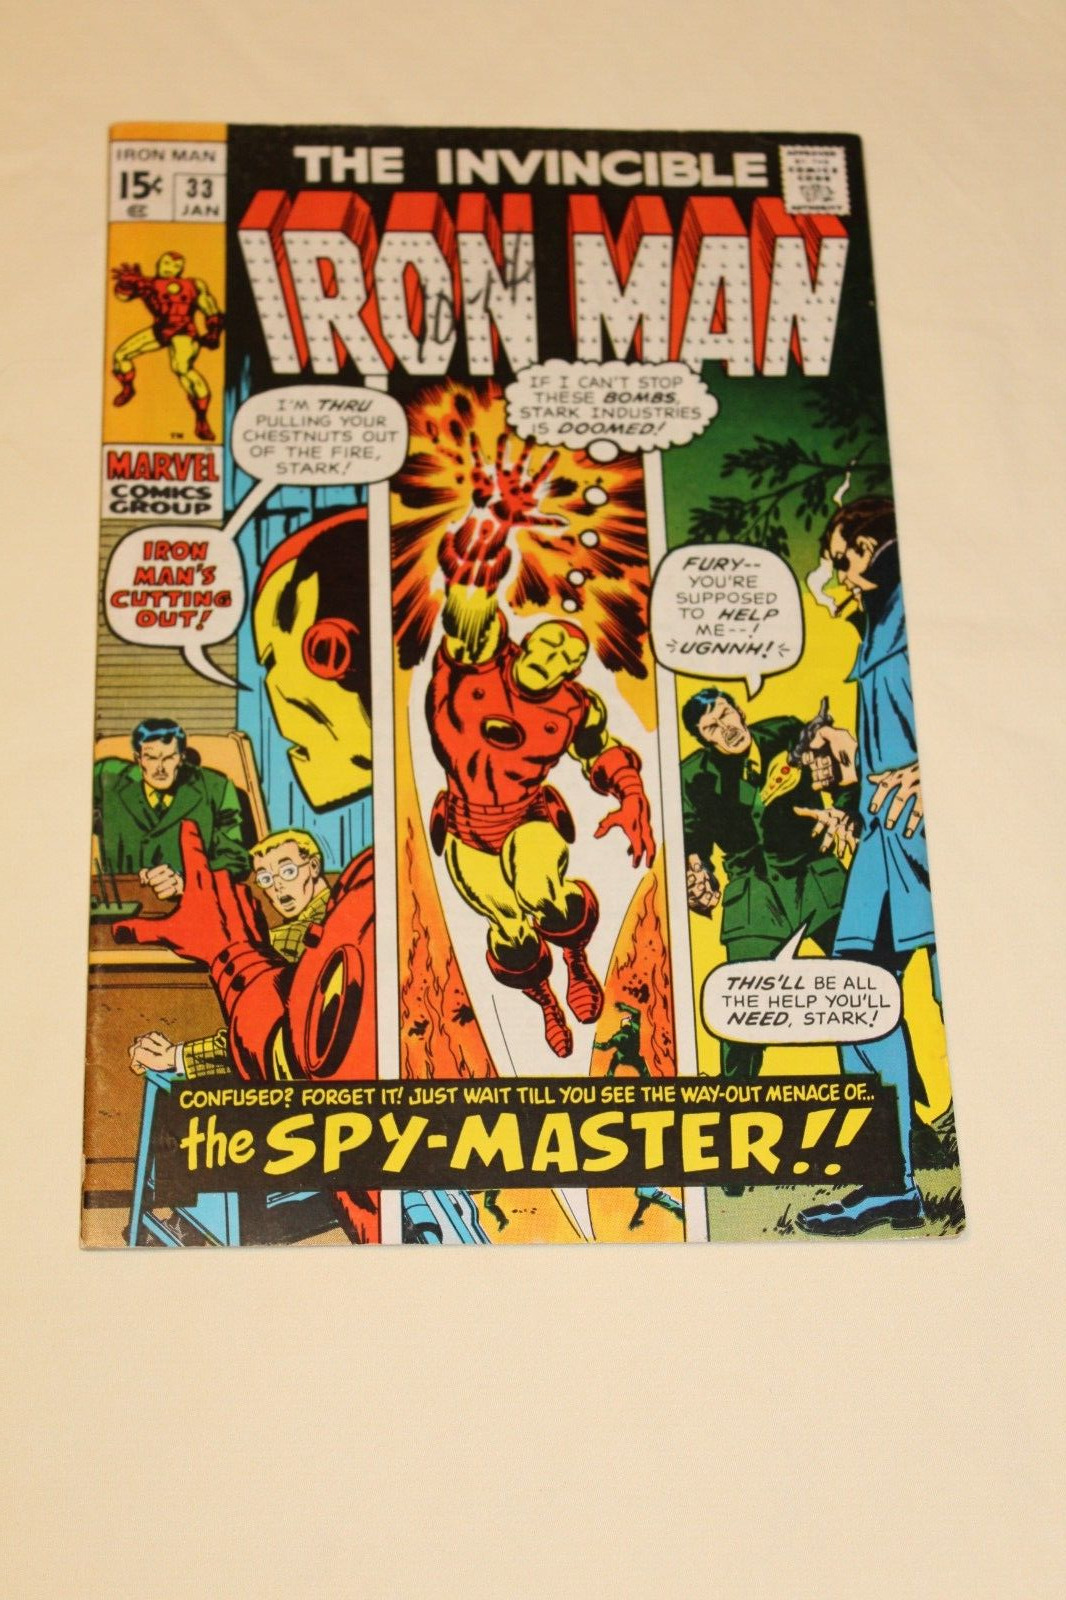 THE INVINCIBLE IRON MAN  Vo l. 1,  No 33,  January  1971, Marvel Comic Group